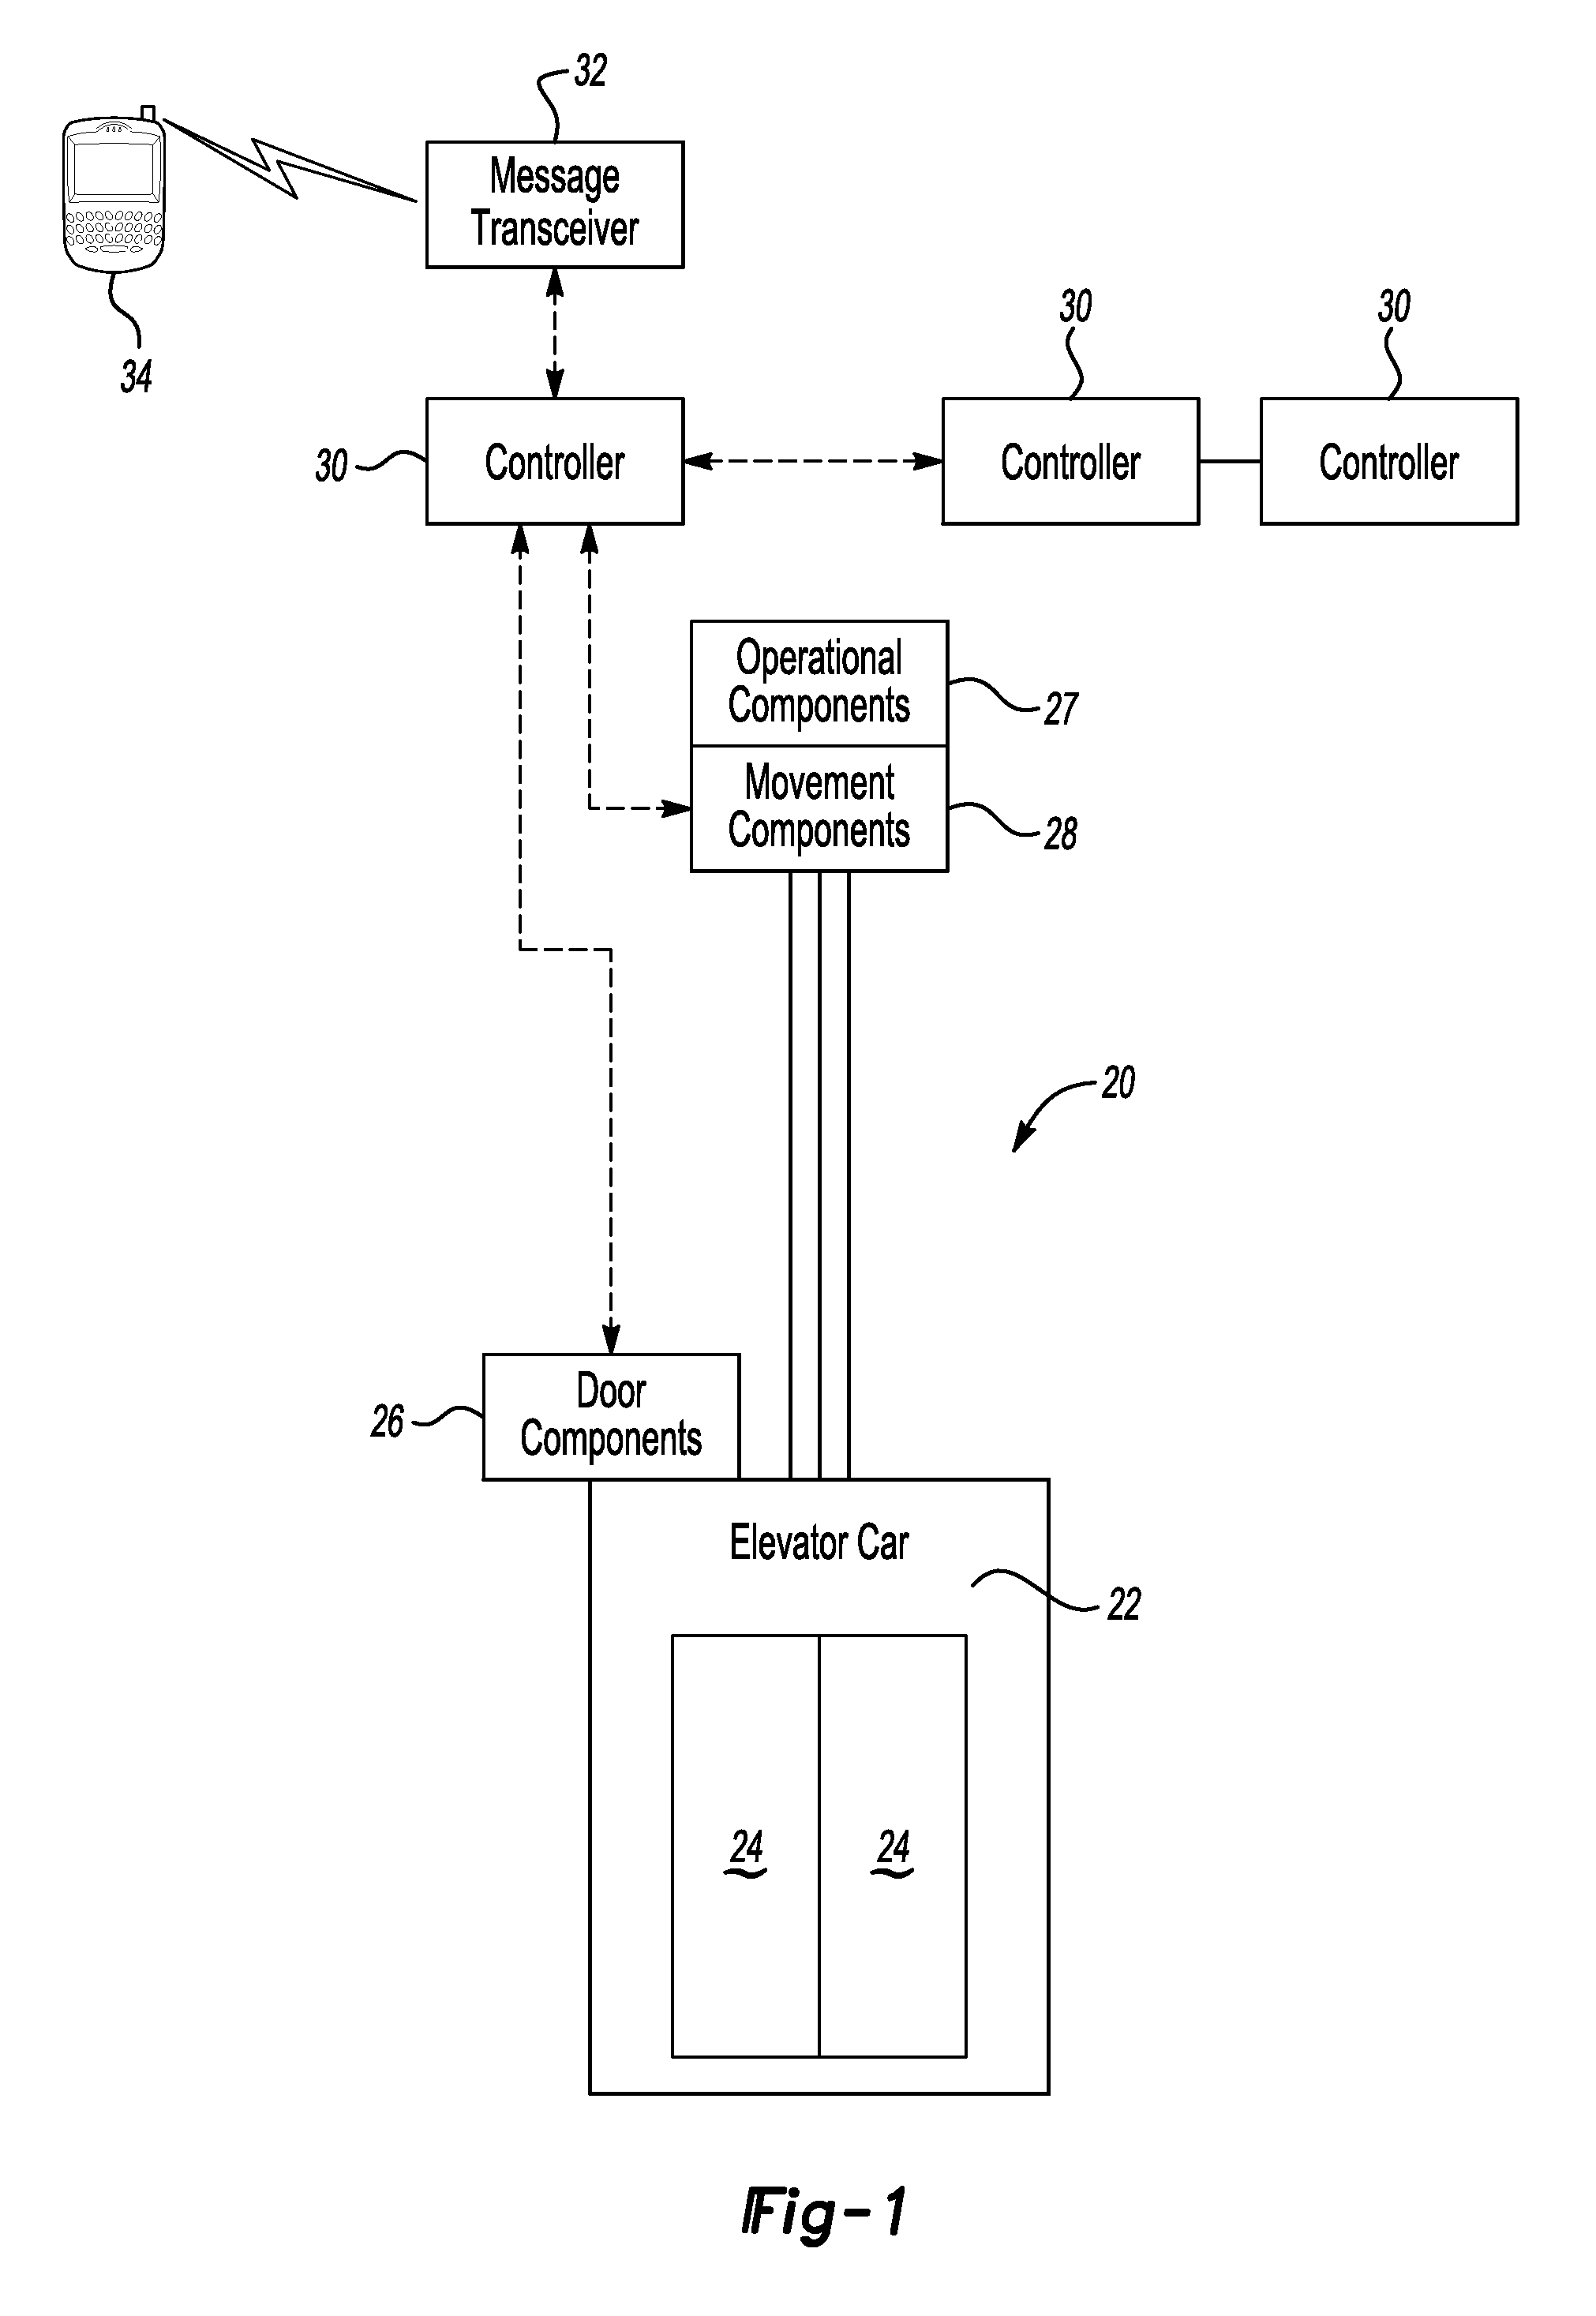 Elevator system with messaging for automated maintenance